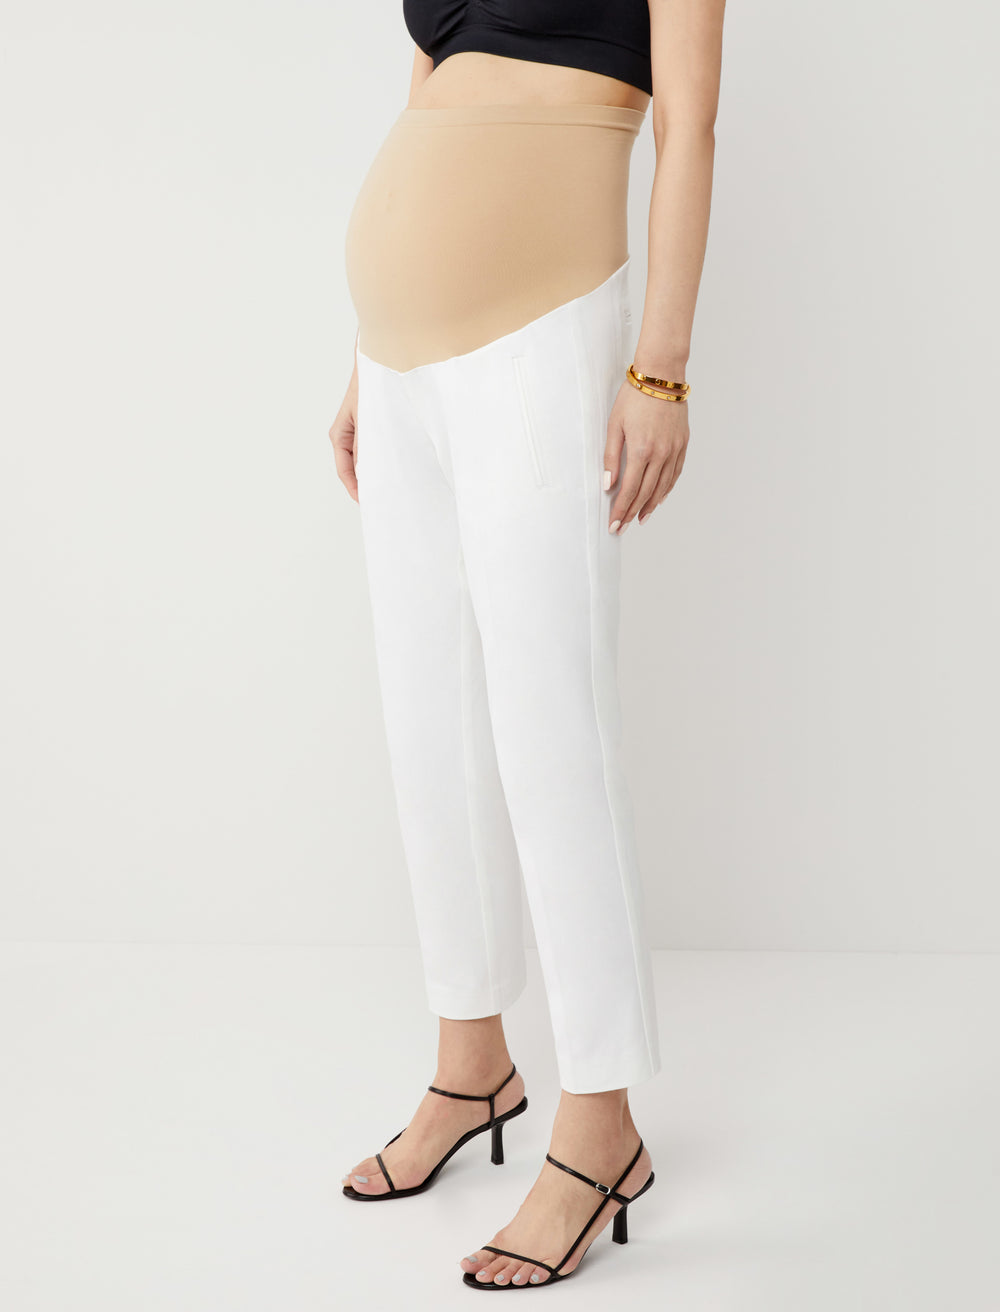 New* Black A Pea in the Pod Maternity Underbelly Cropped Skinny